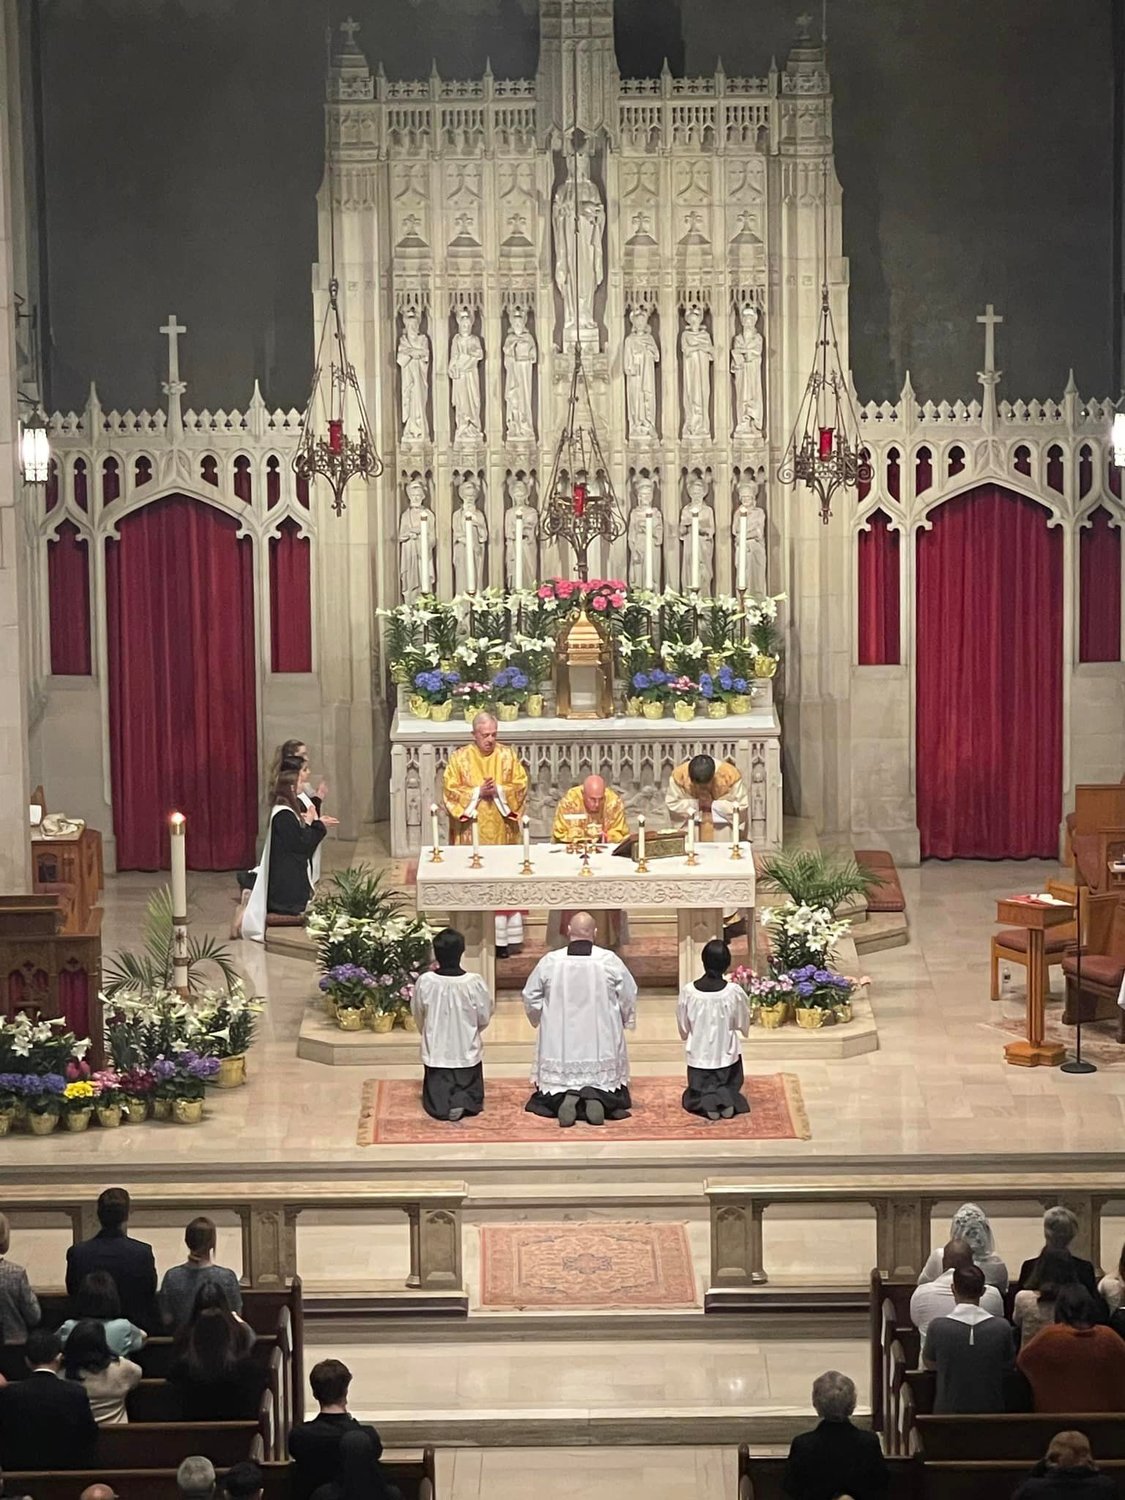 EASTER SUNDAY: Rhode Island’s Catholic churches are filled with flowers and faithful on Easter morning. Pictured: St. Paul Church, Cranston.